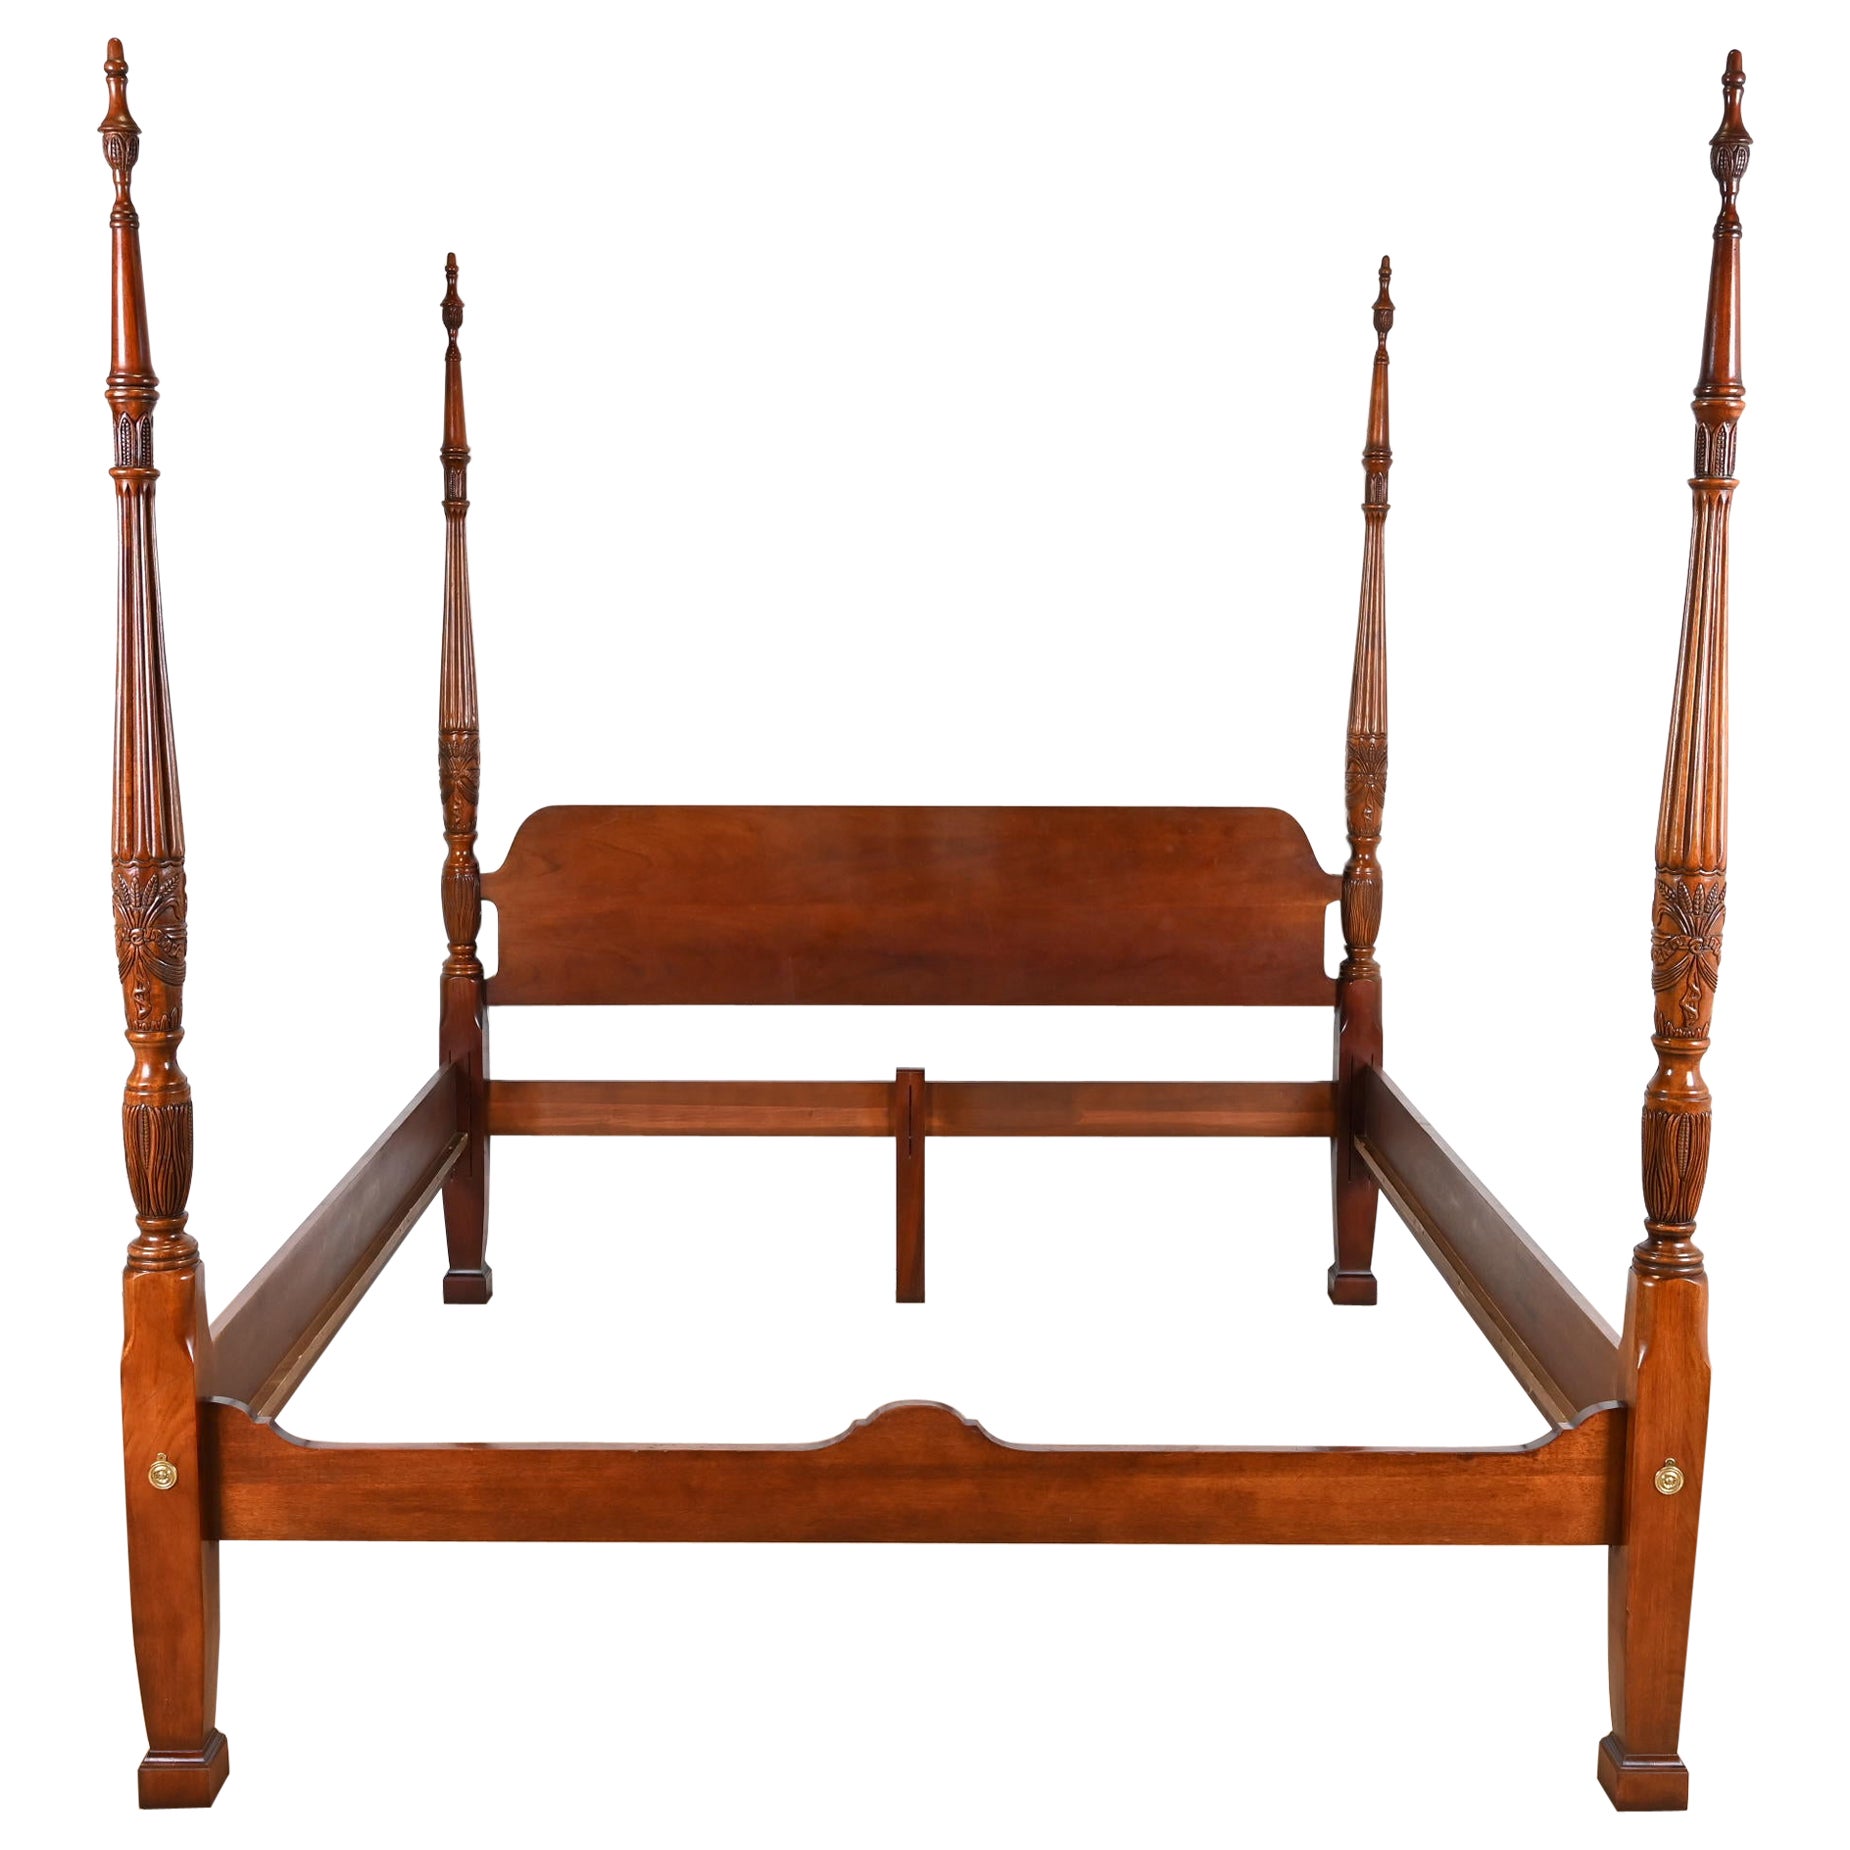 Thomasville Georgian Carved Mahogany King Size Poster Bed